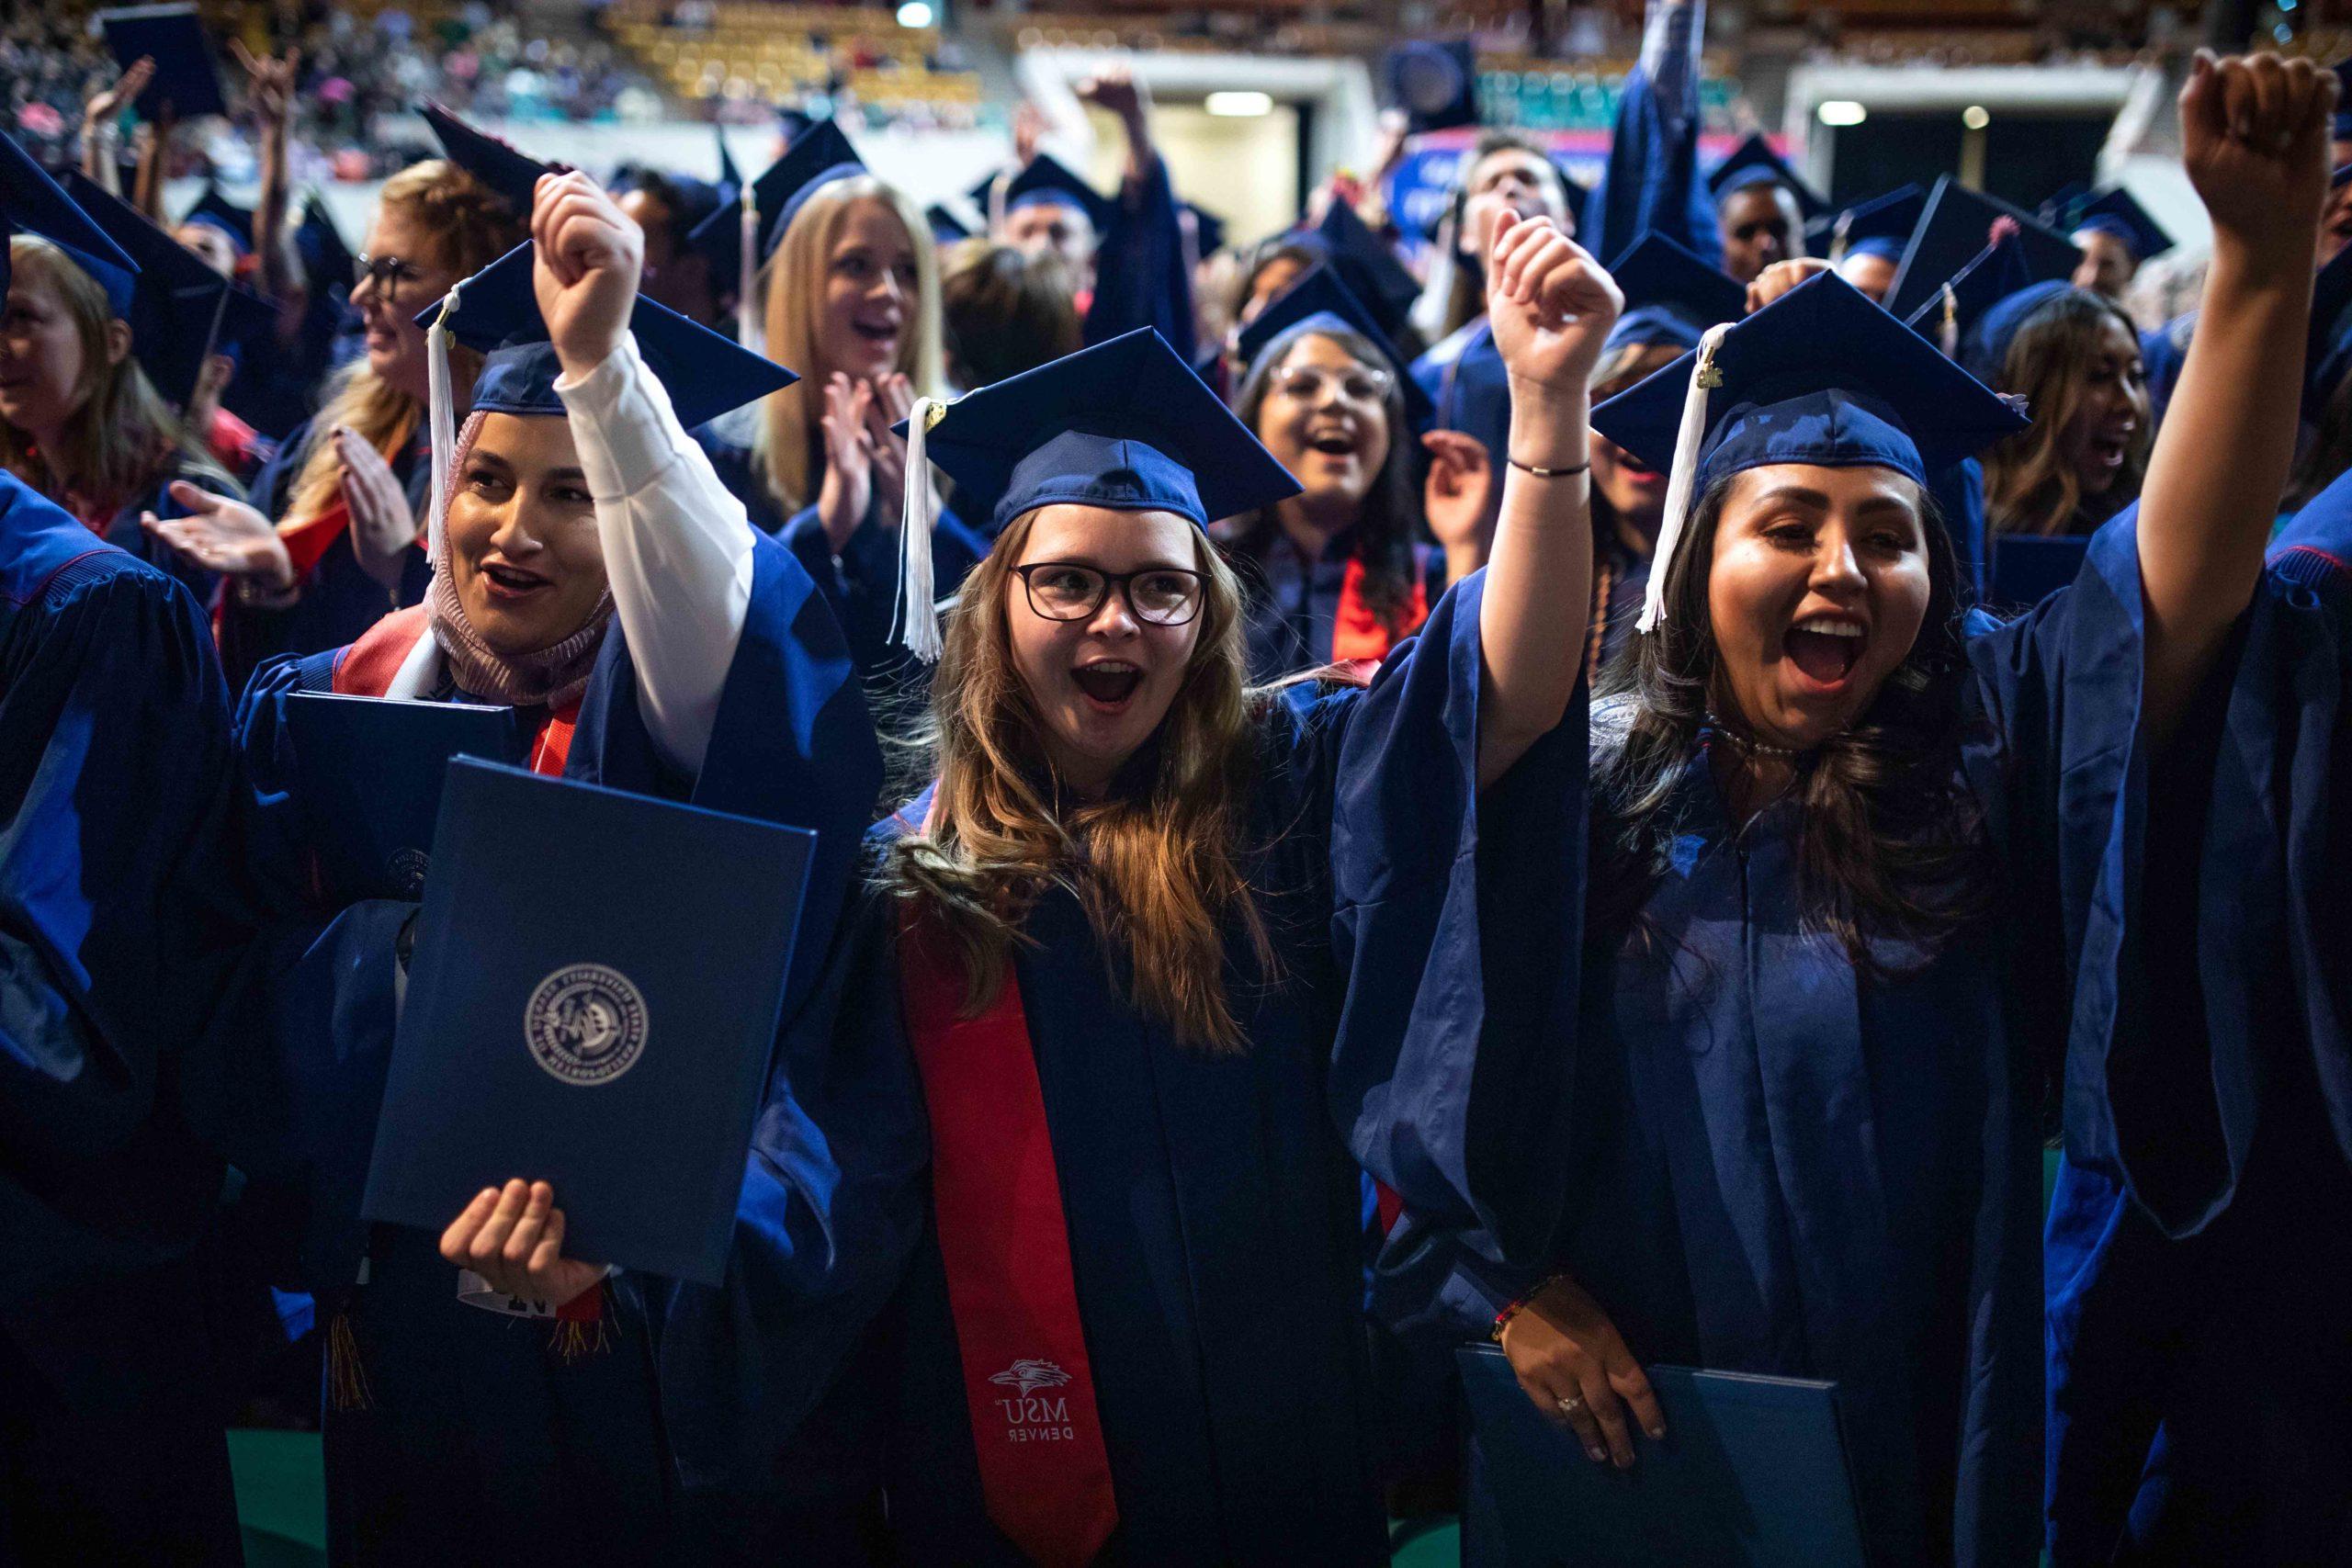 Graduates cheering during the commencement ceremony.